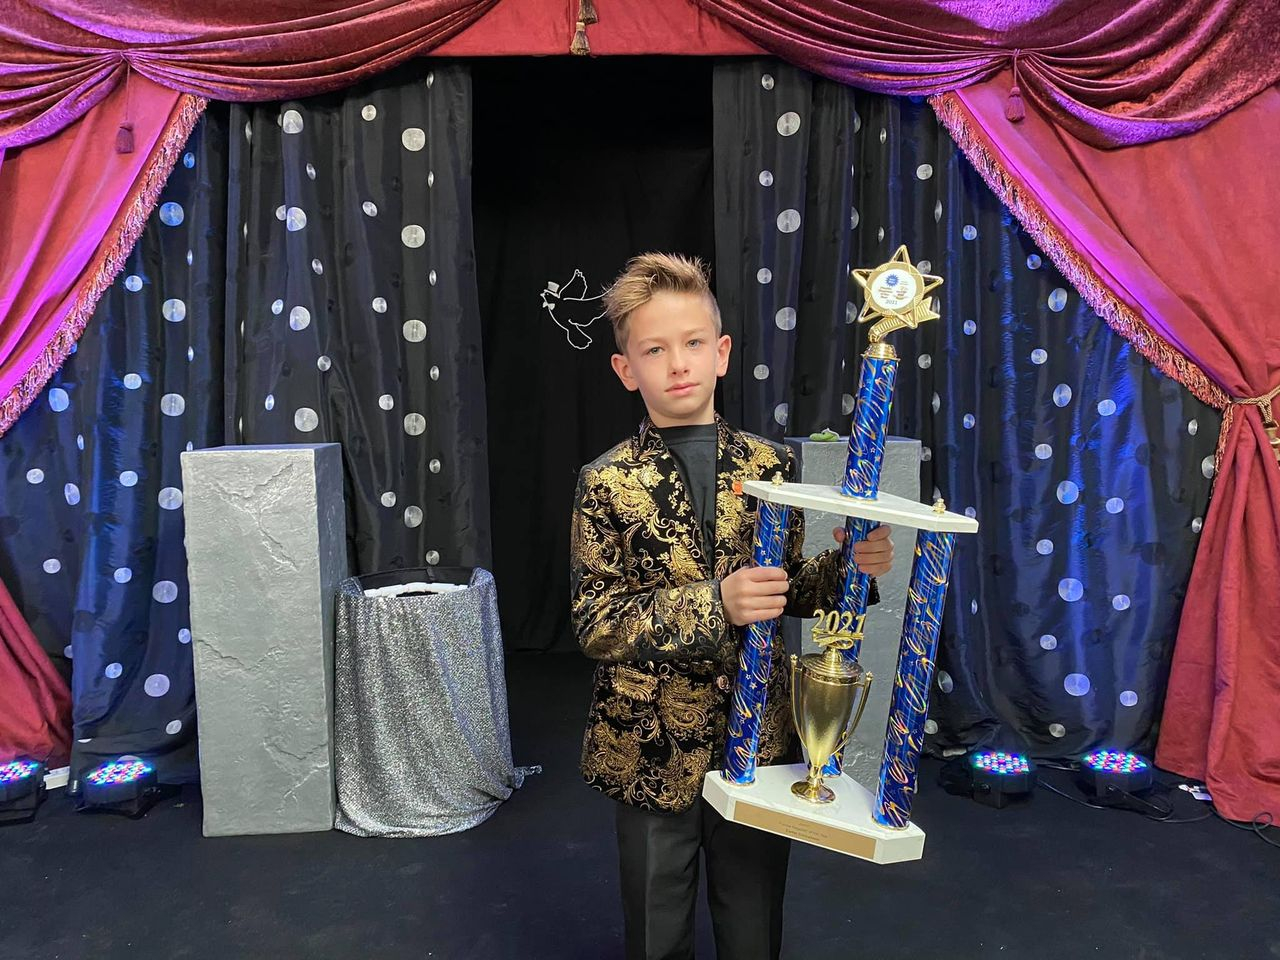 A young boy holding a trophy in front of a stage.